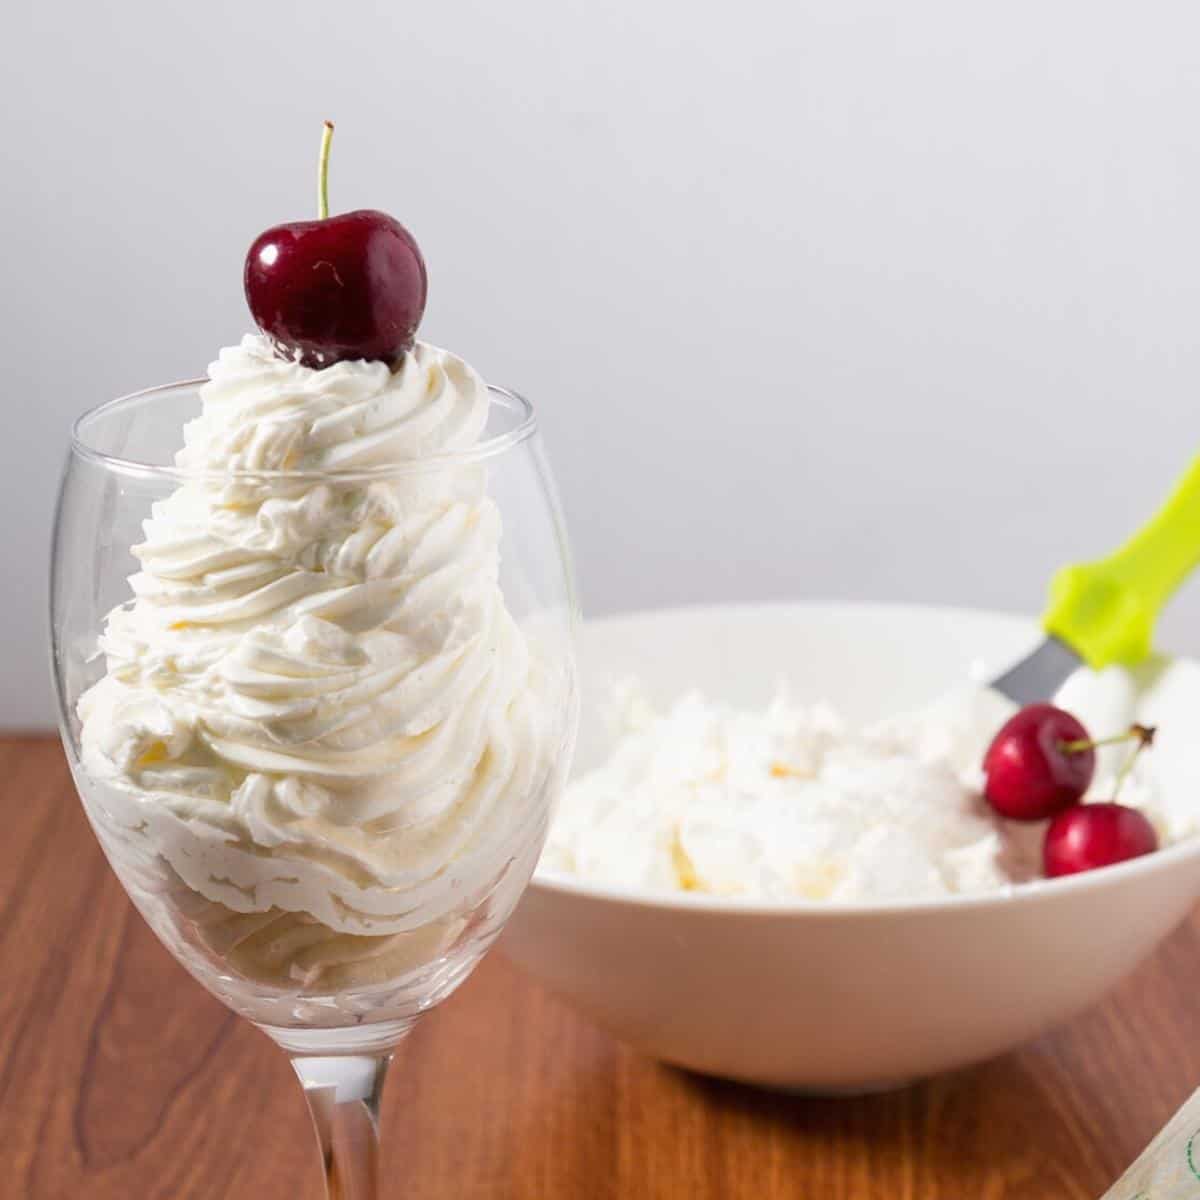 A wine glass with Swiss Meringue Buttercream Frosting.